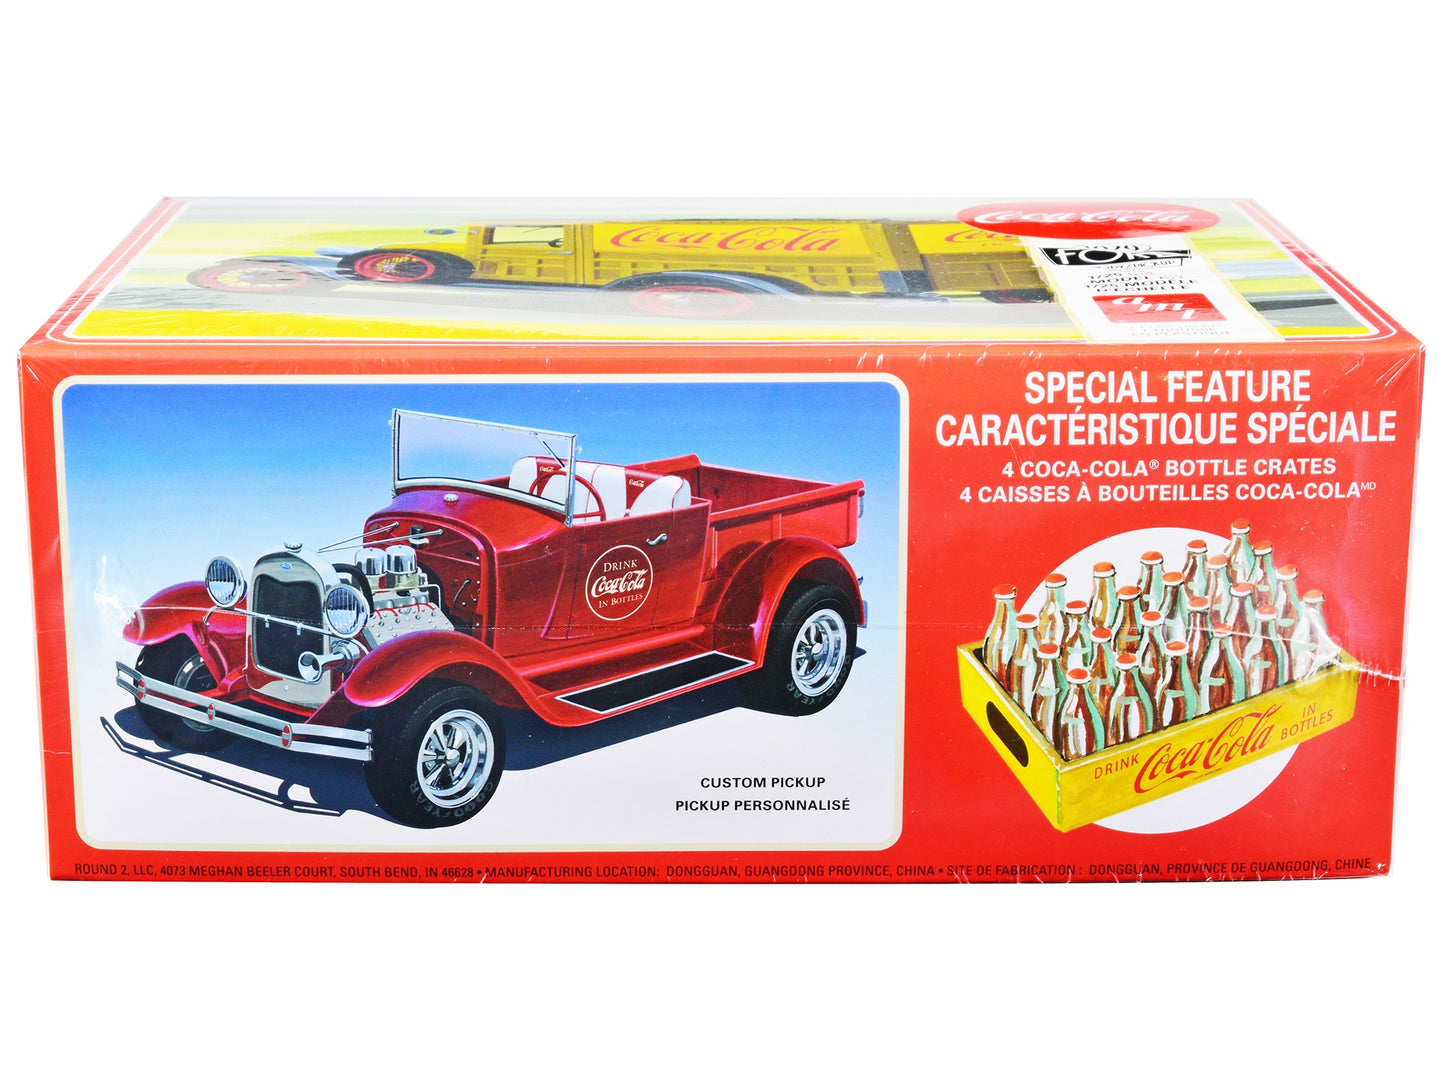 Skill 3 Model Kit 1929 Ford Woody/Pickup 4-in-1 Kit "Coca-Cola" 1/25 Scale Model Car by AMT